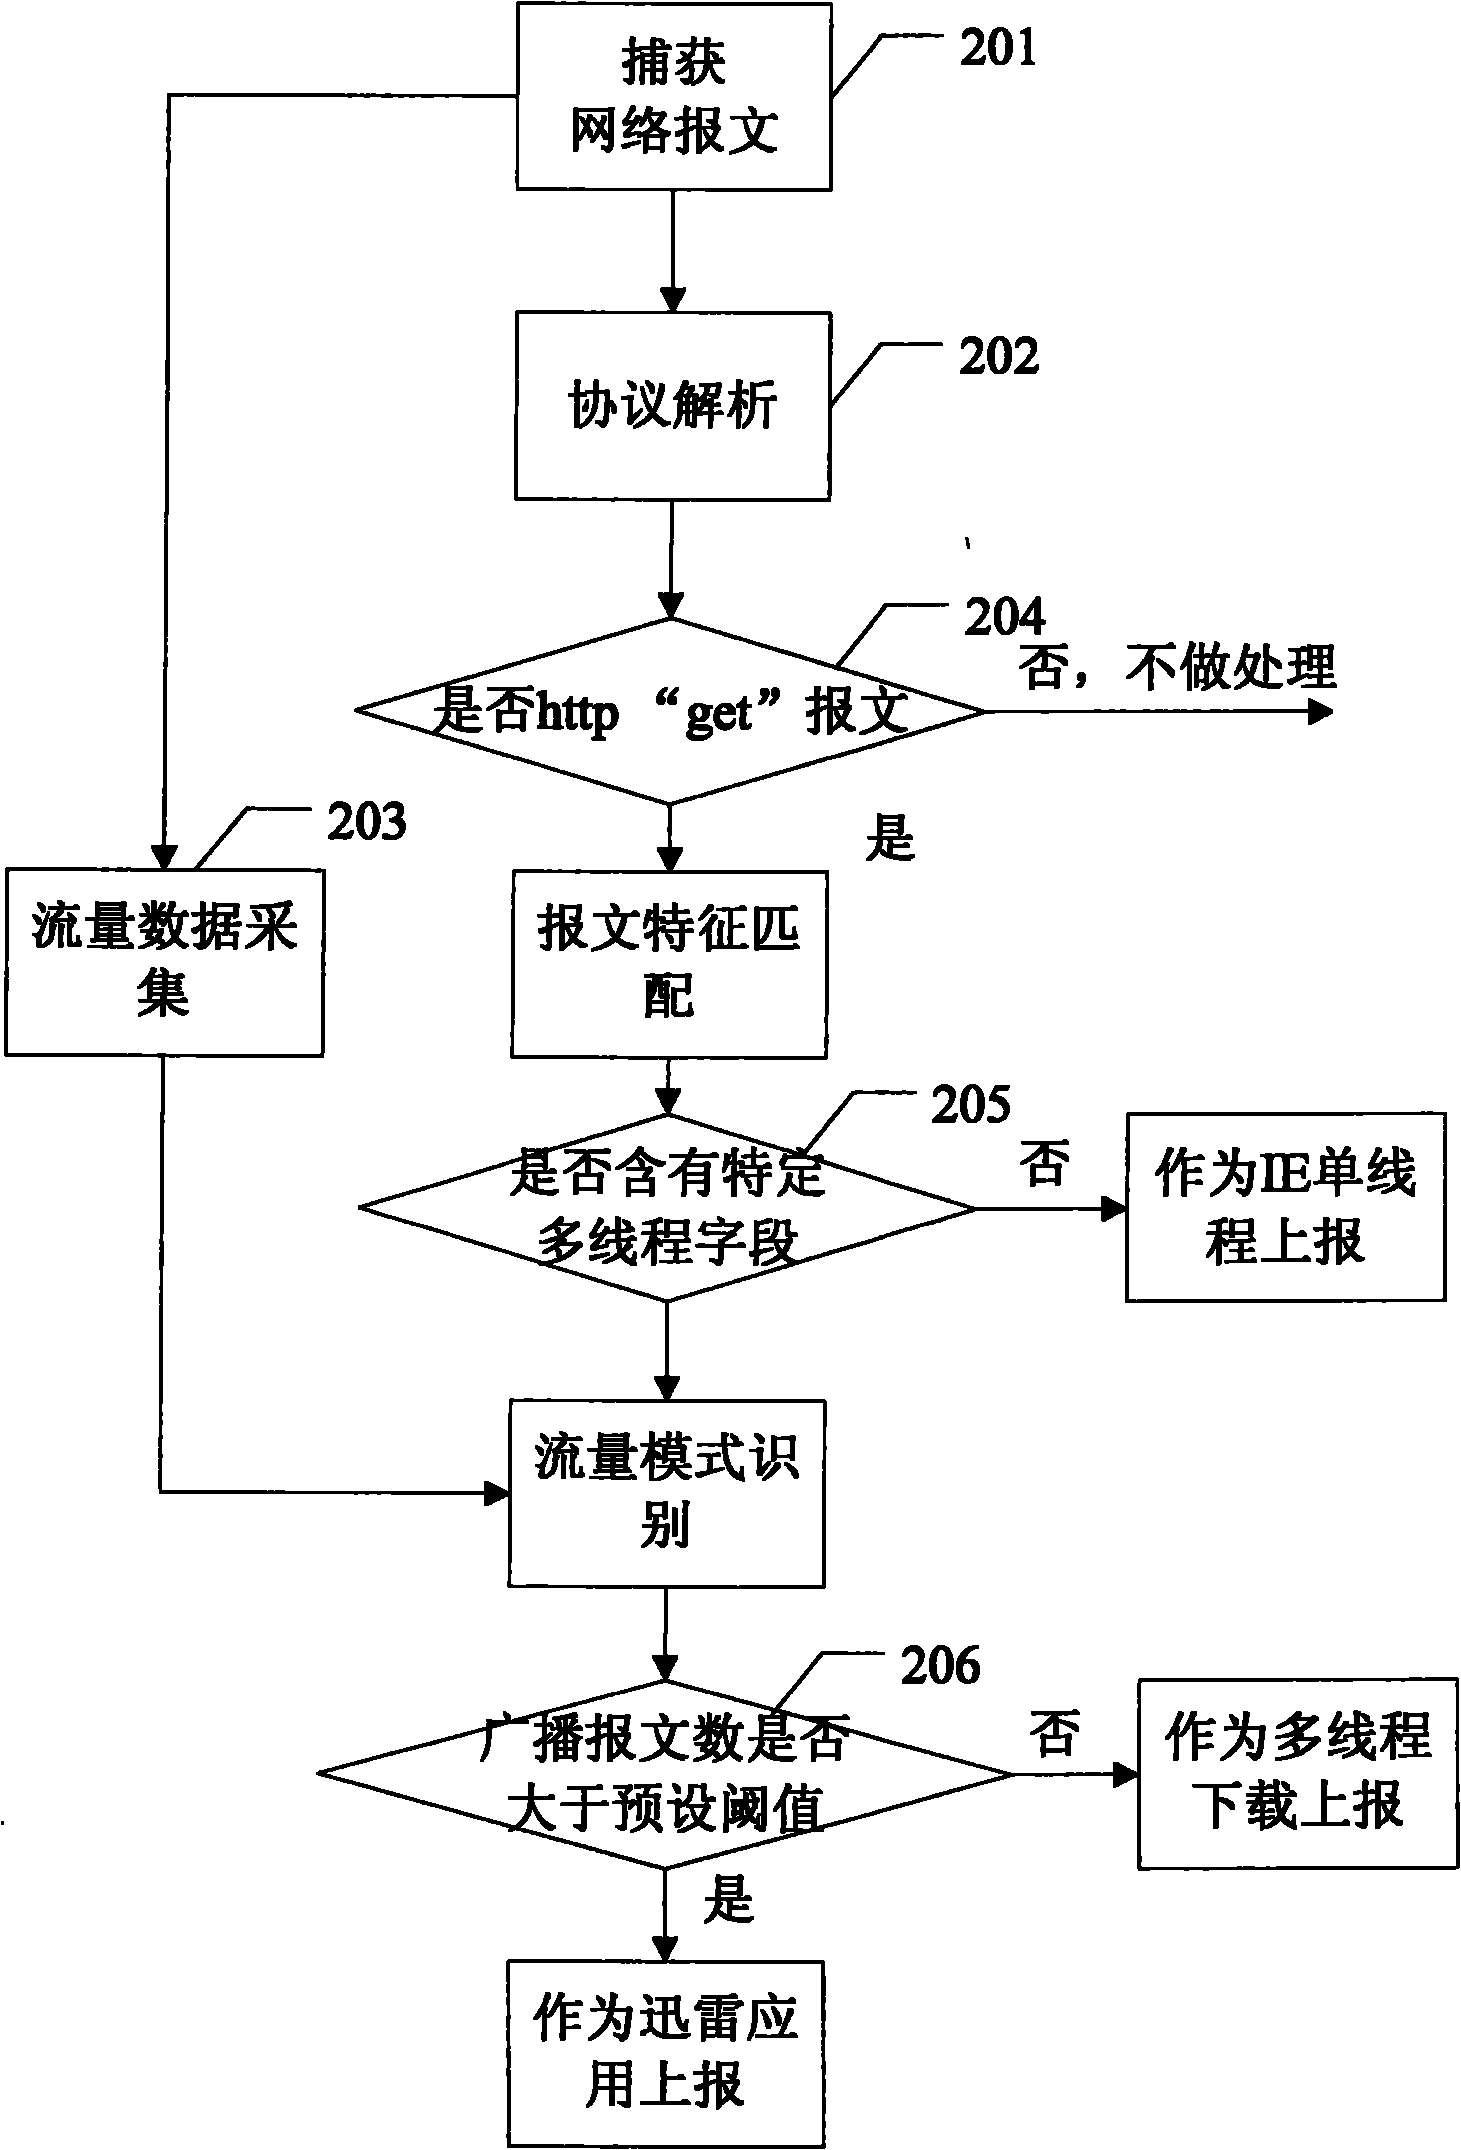 Method and system for classifying local area network http application services